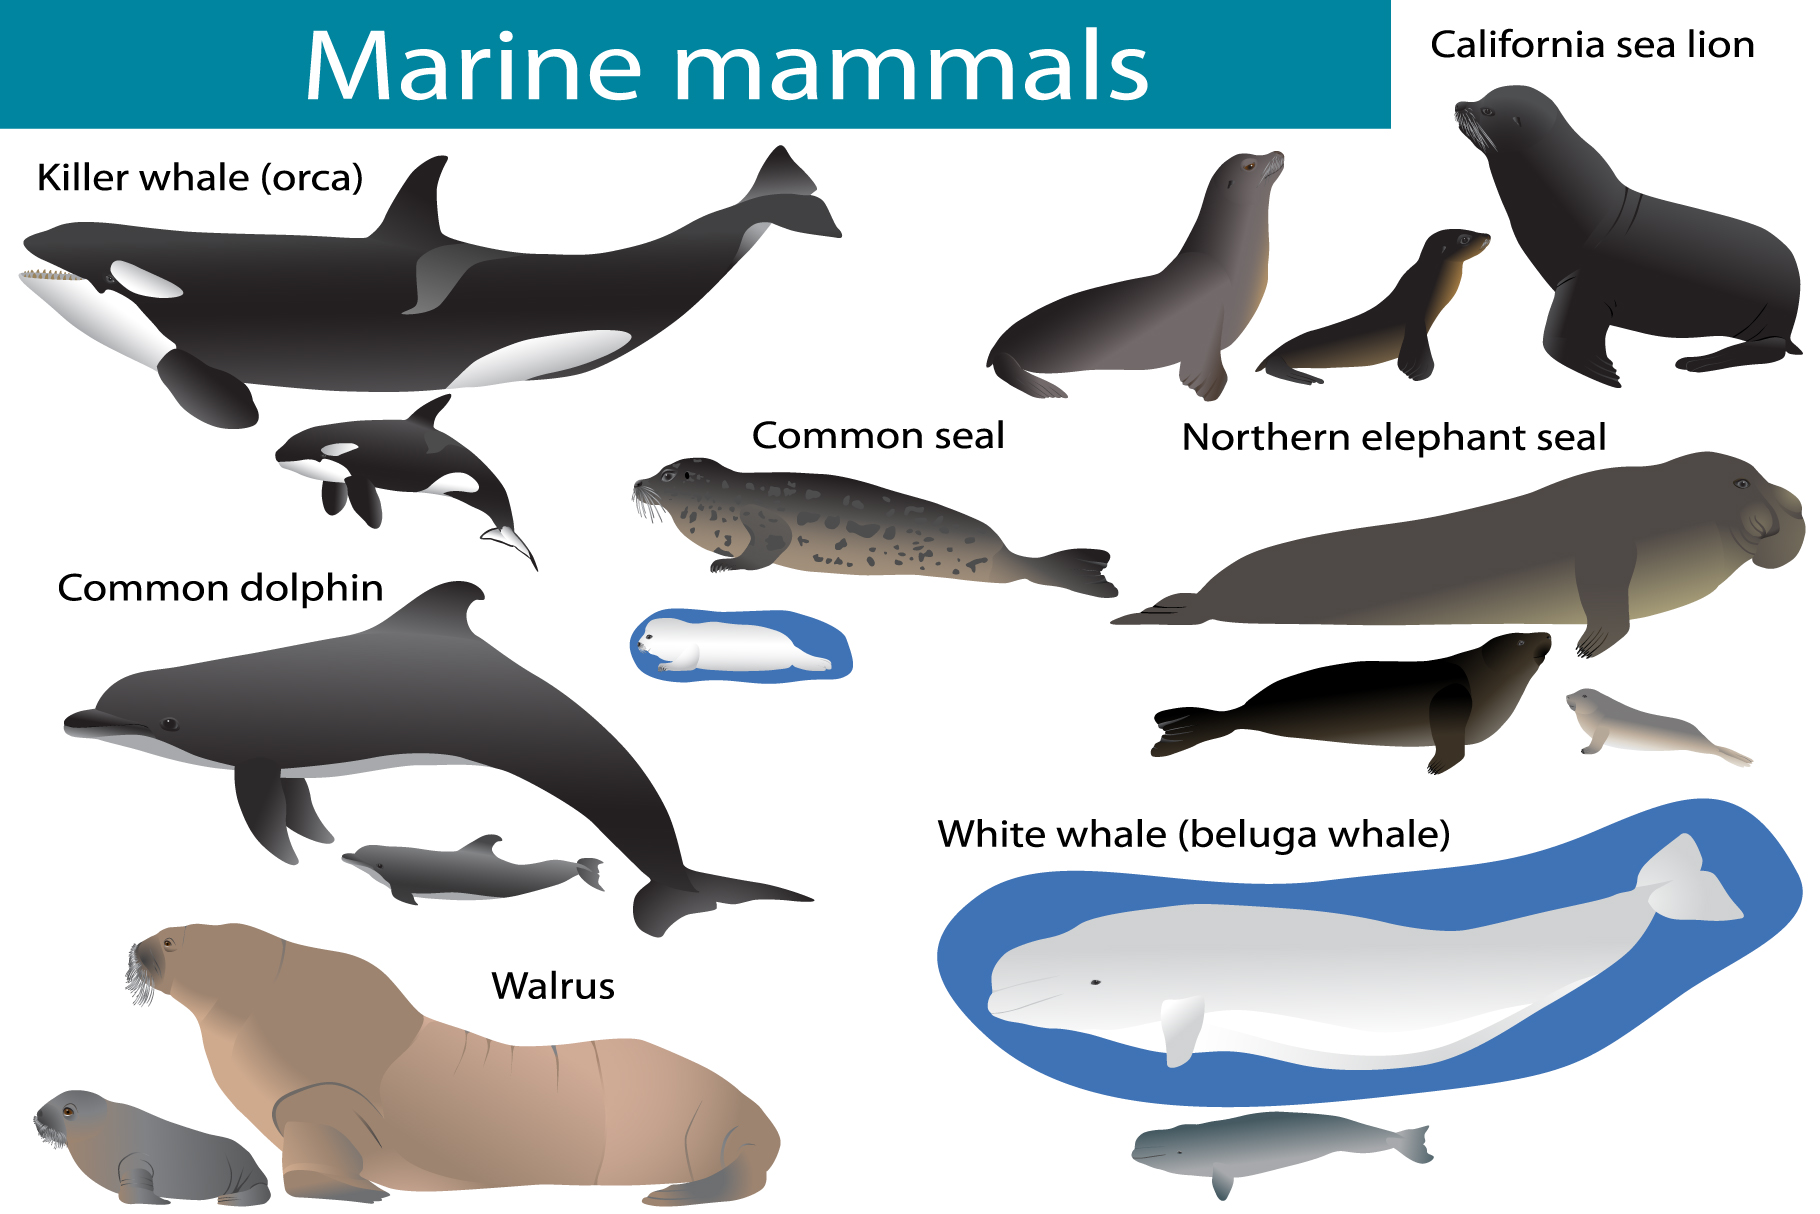 What is the kingdom of marine mammals?